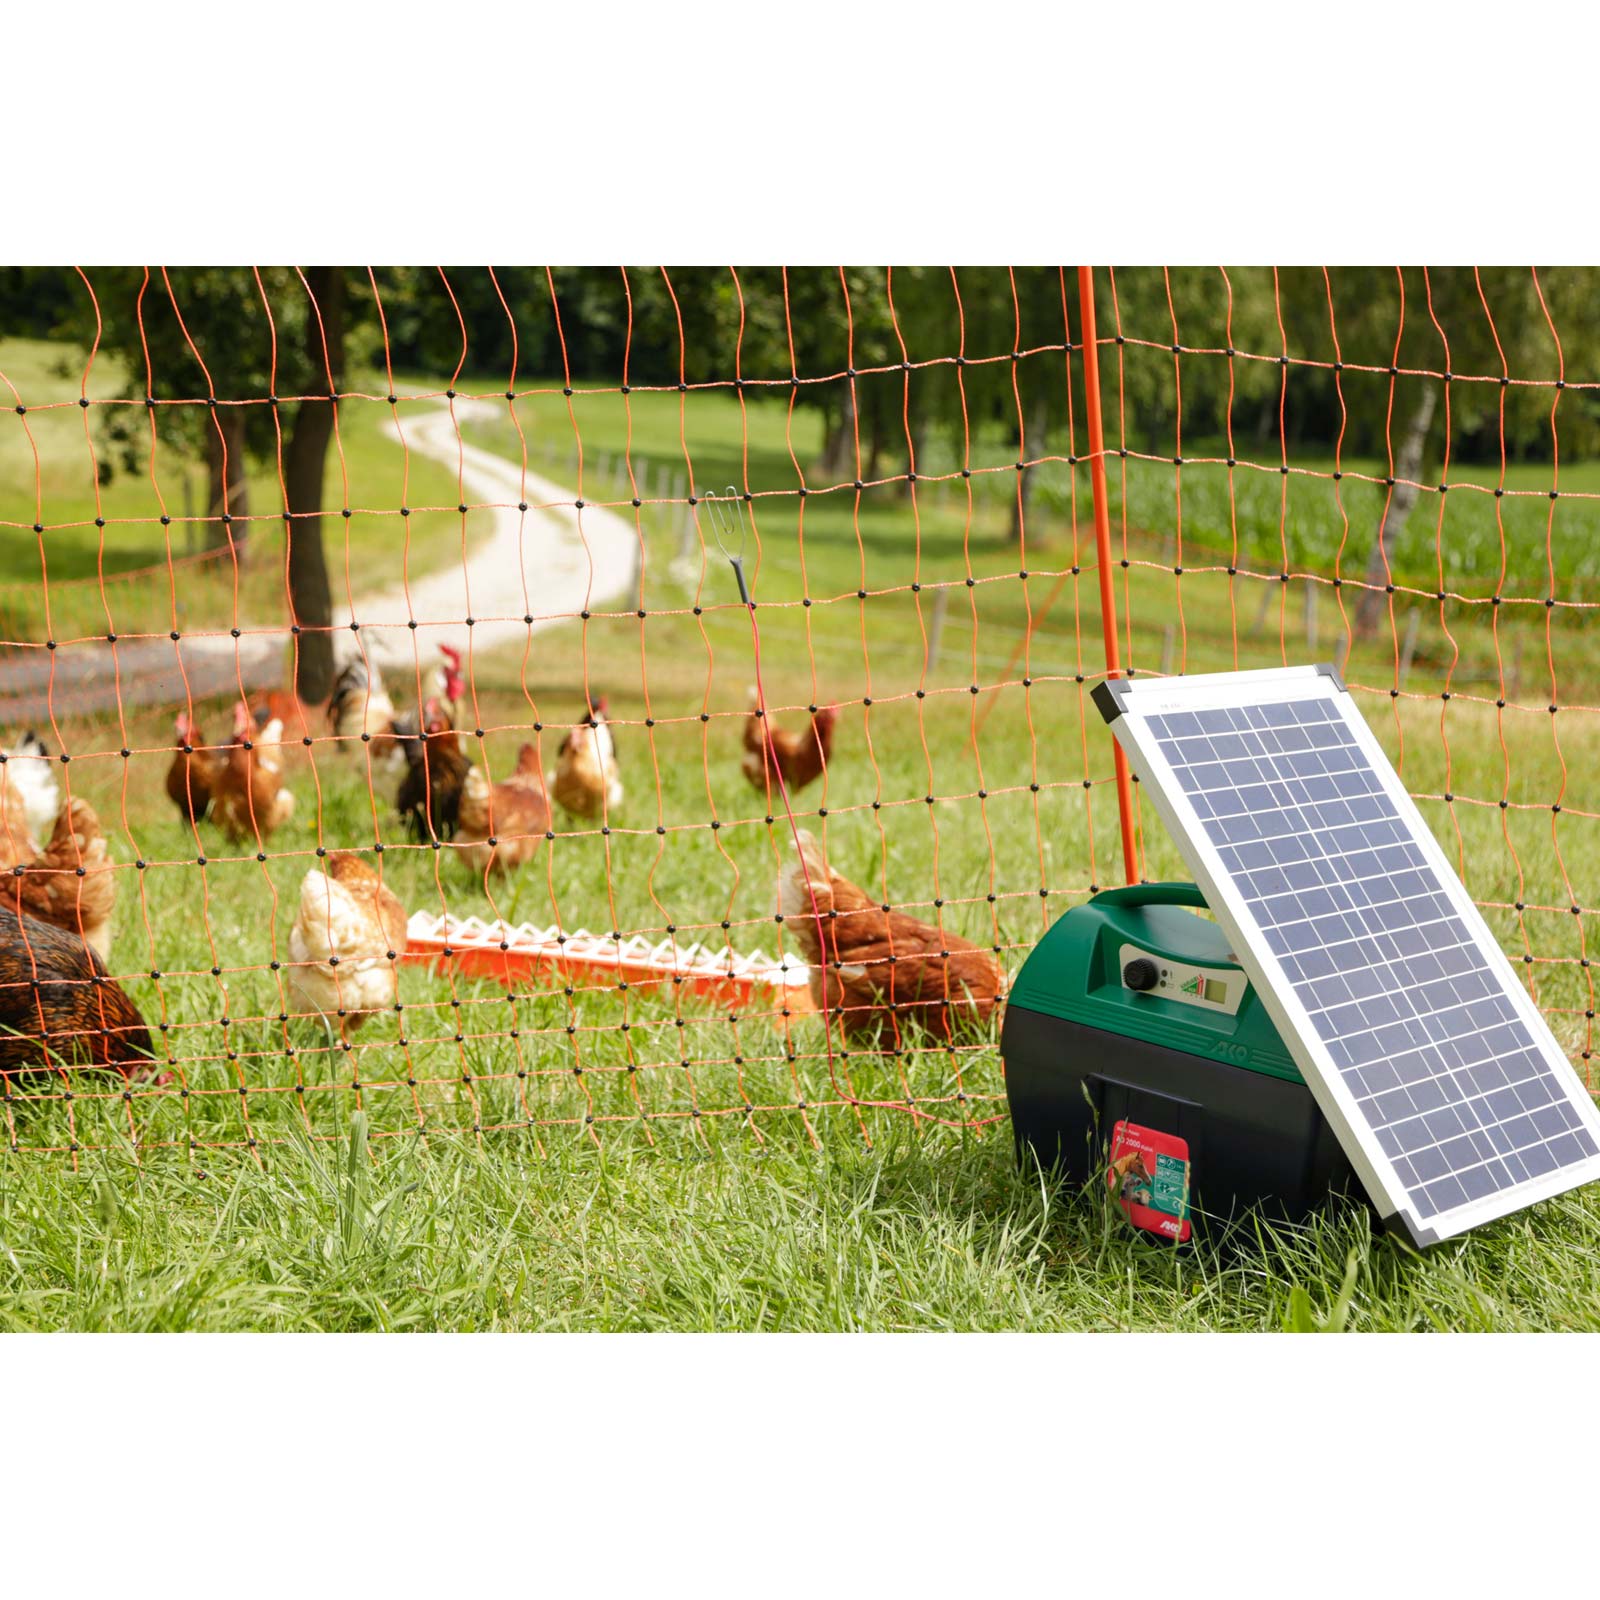 AKO Mobil Power AD 2000 electric fence energiser 12V, 3 joules